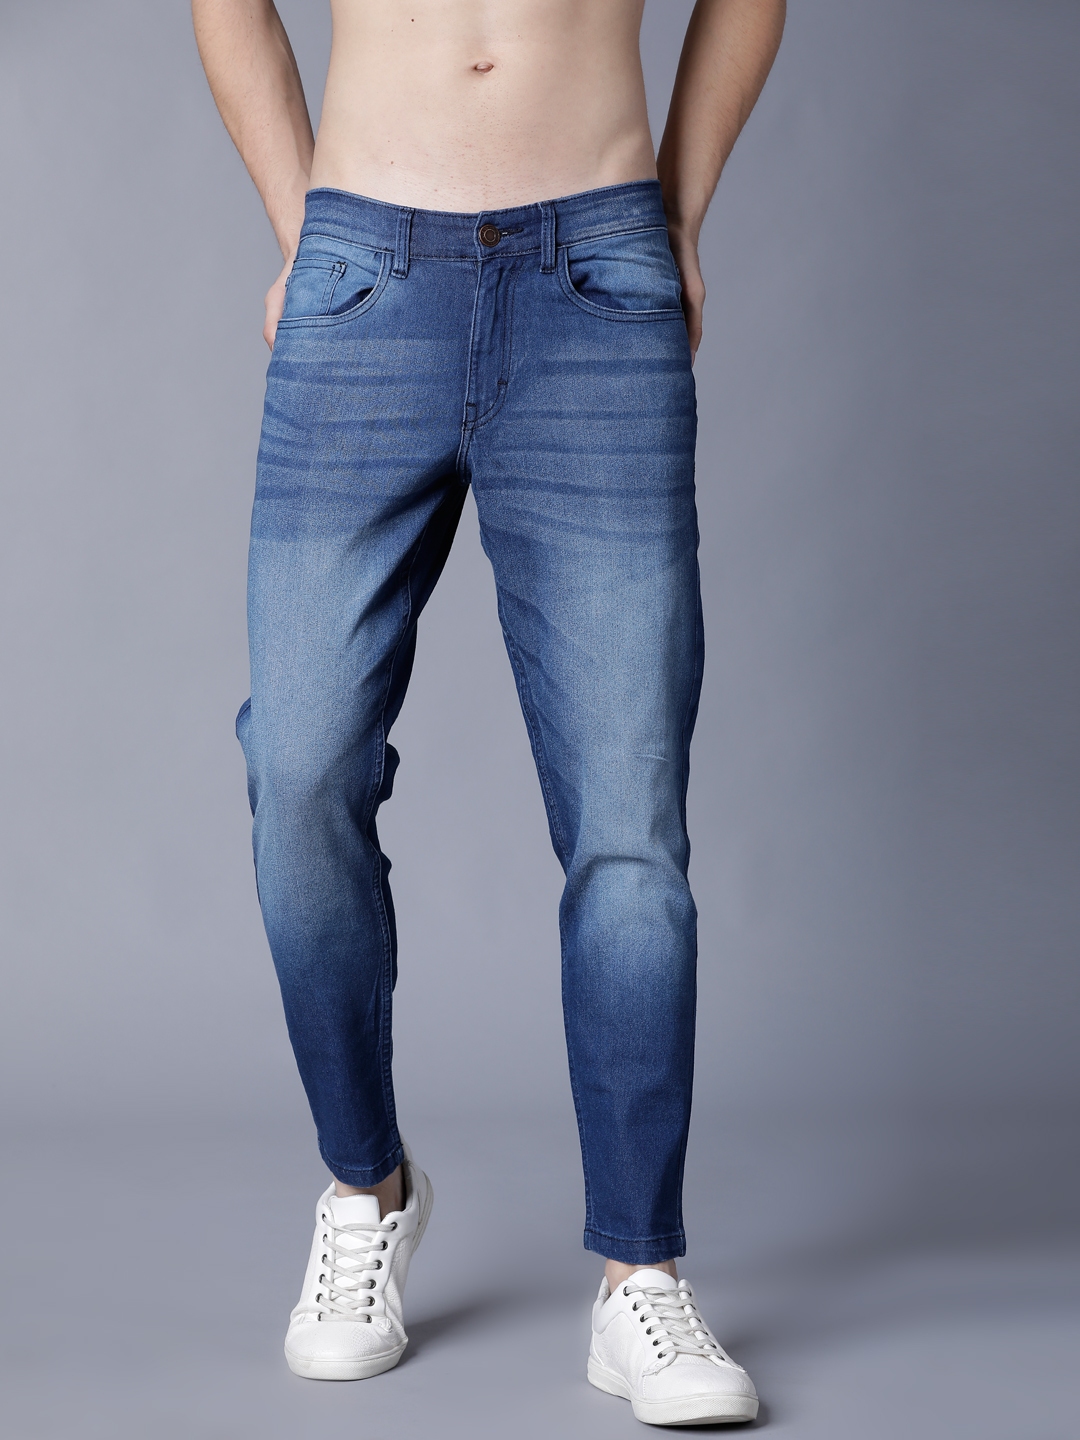 Mens Tapered Blue Jeans For Sale Off 78